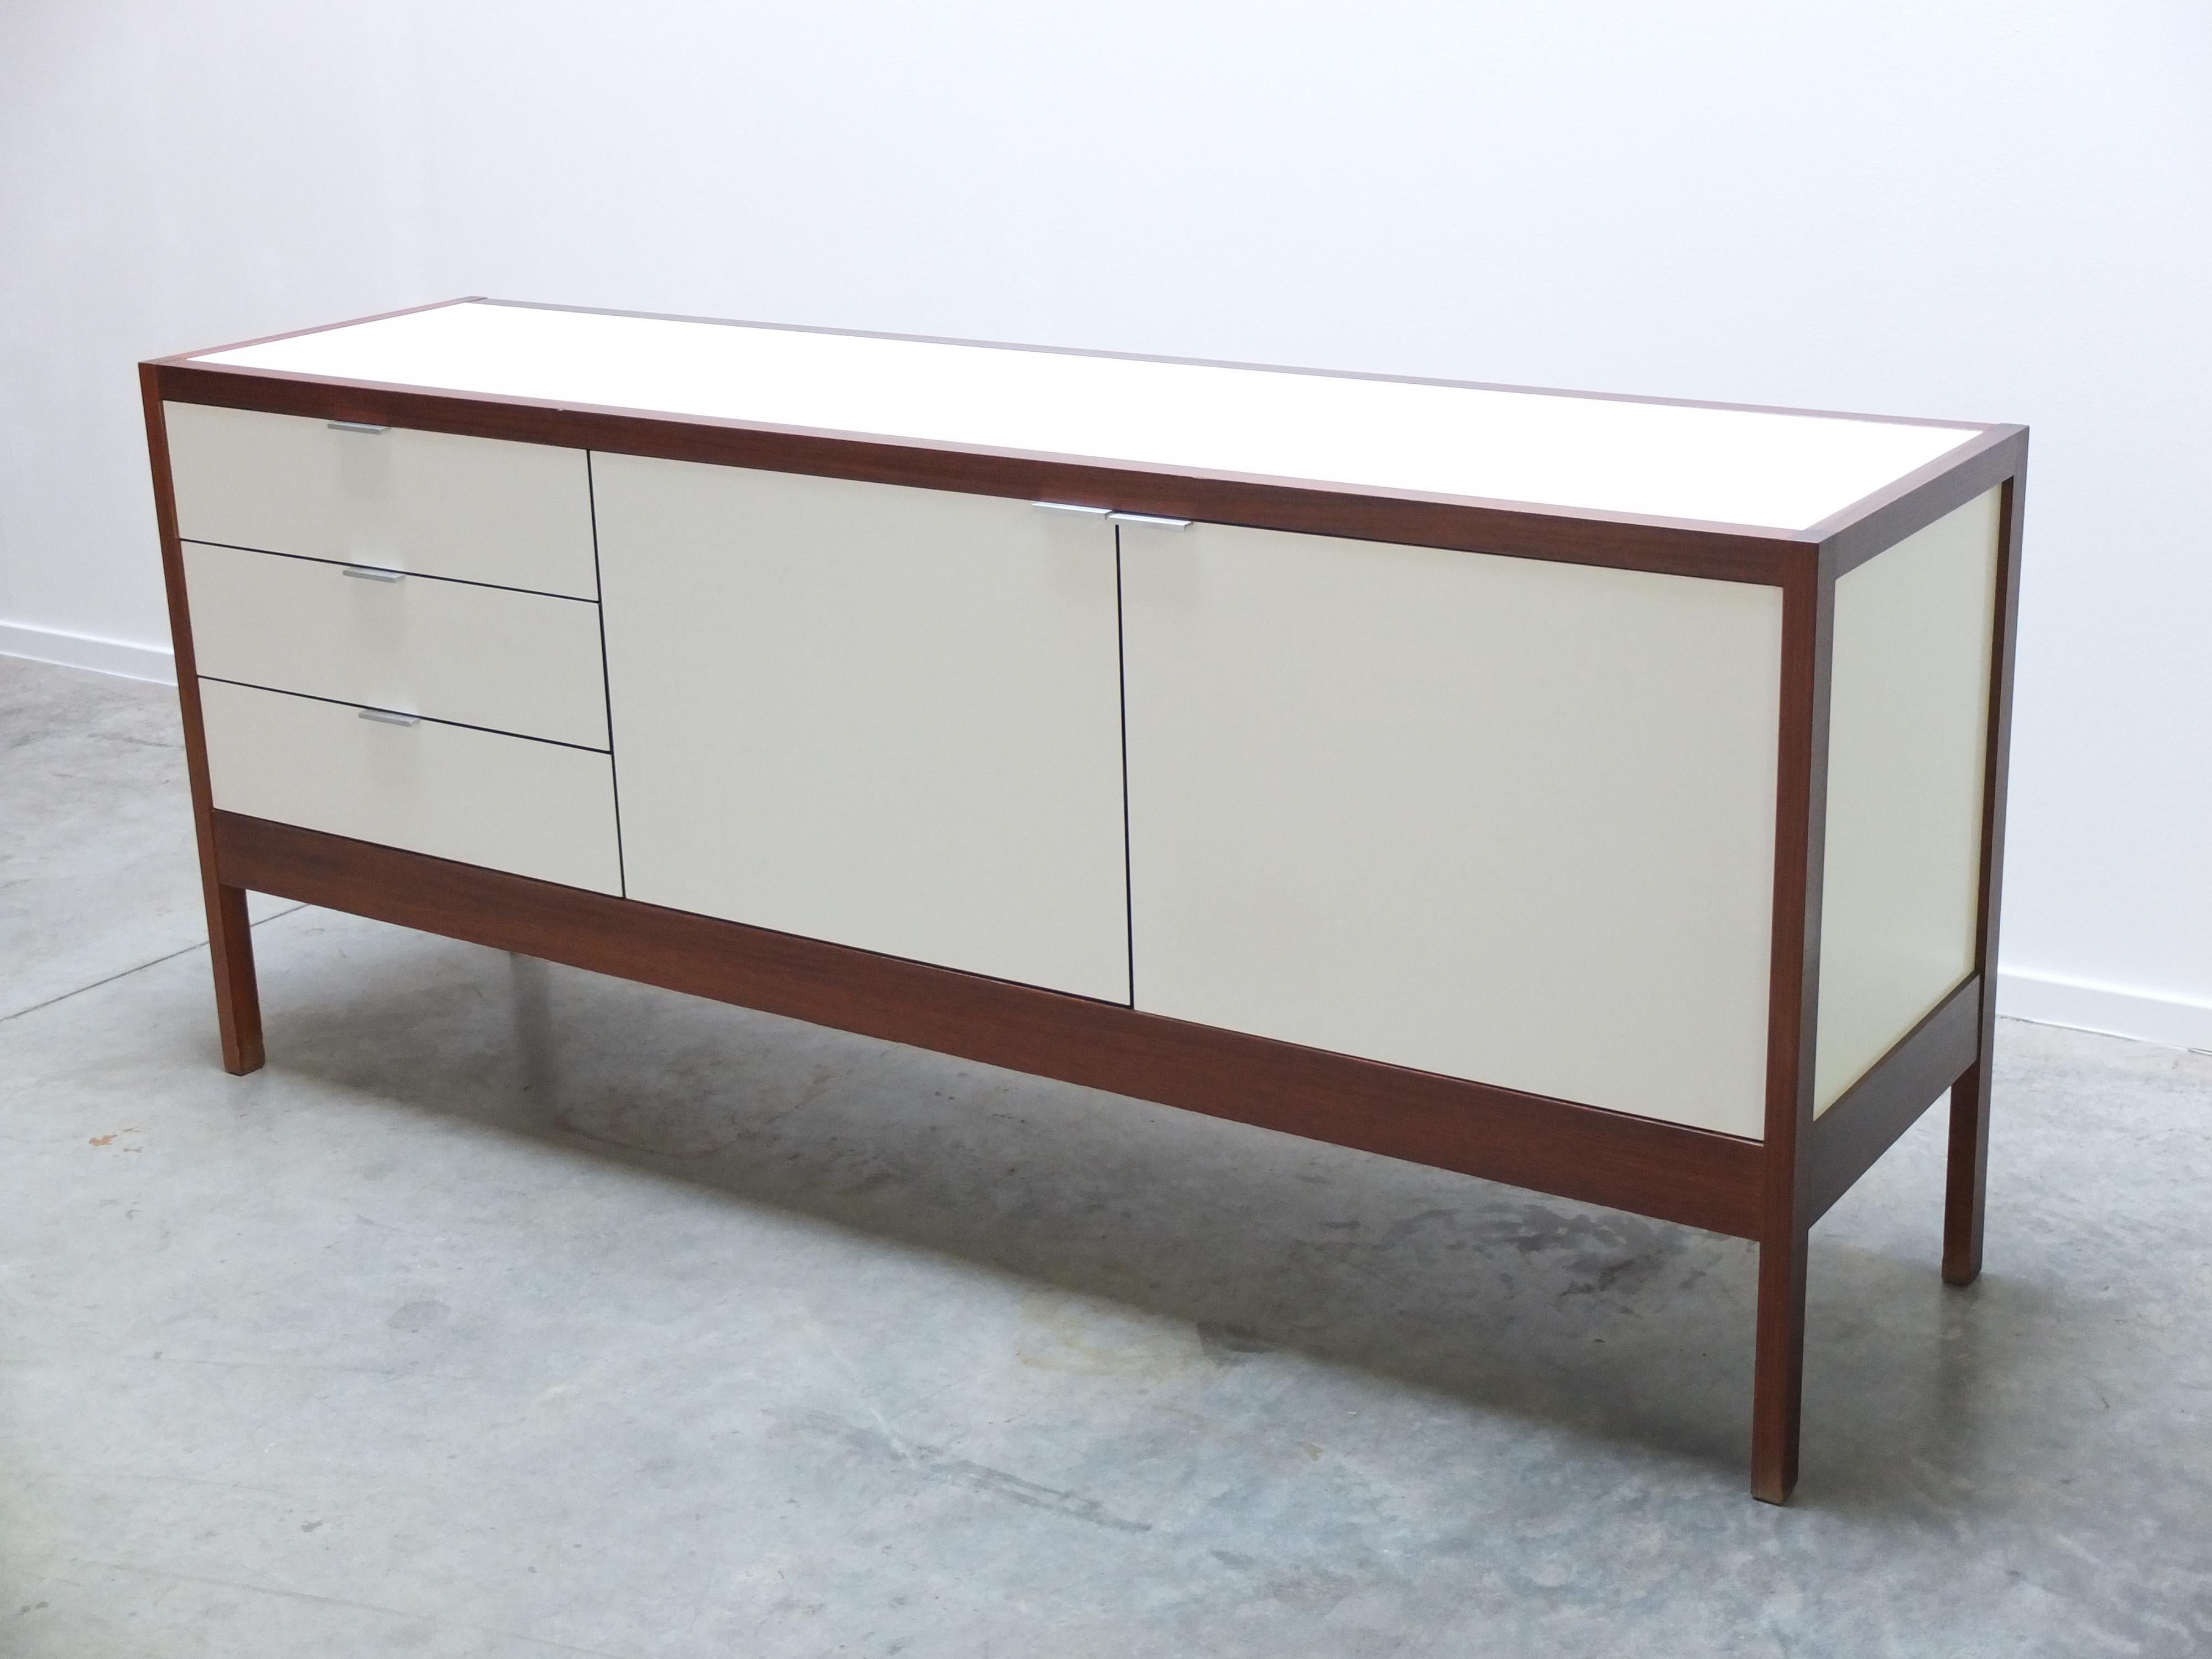 High End 'Series 3' Sideboard by Dieter Waeckerlin for Idealheim, 1960s For Sale 10